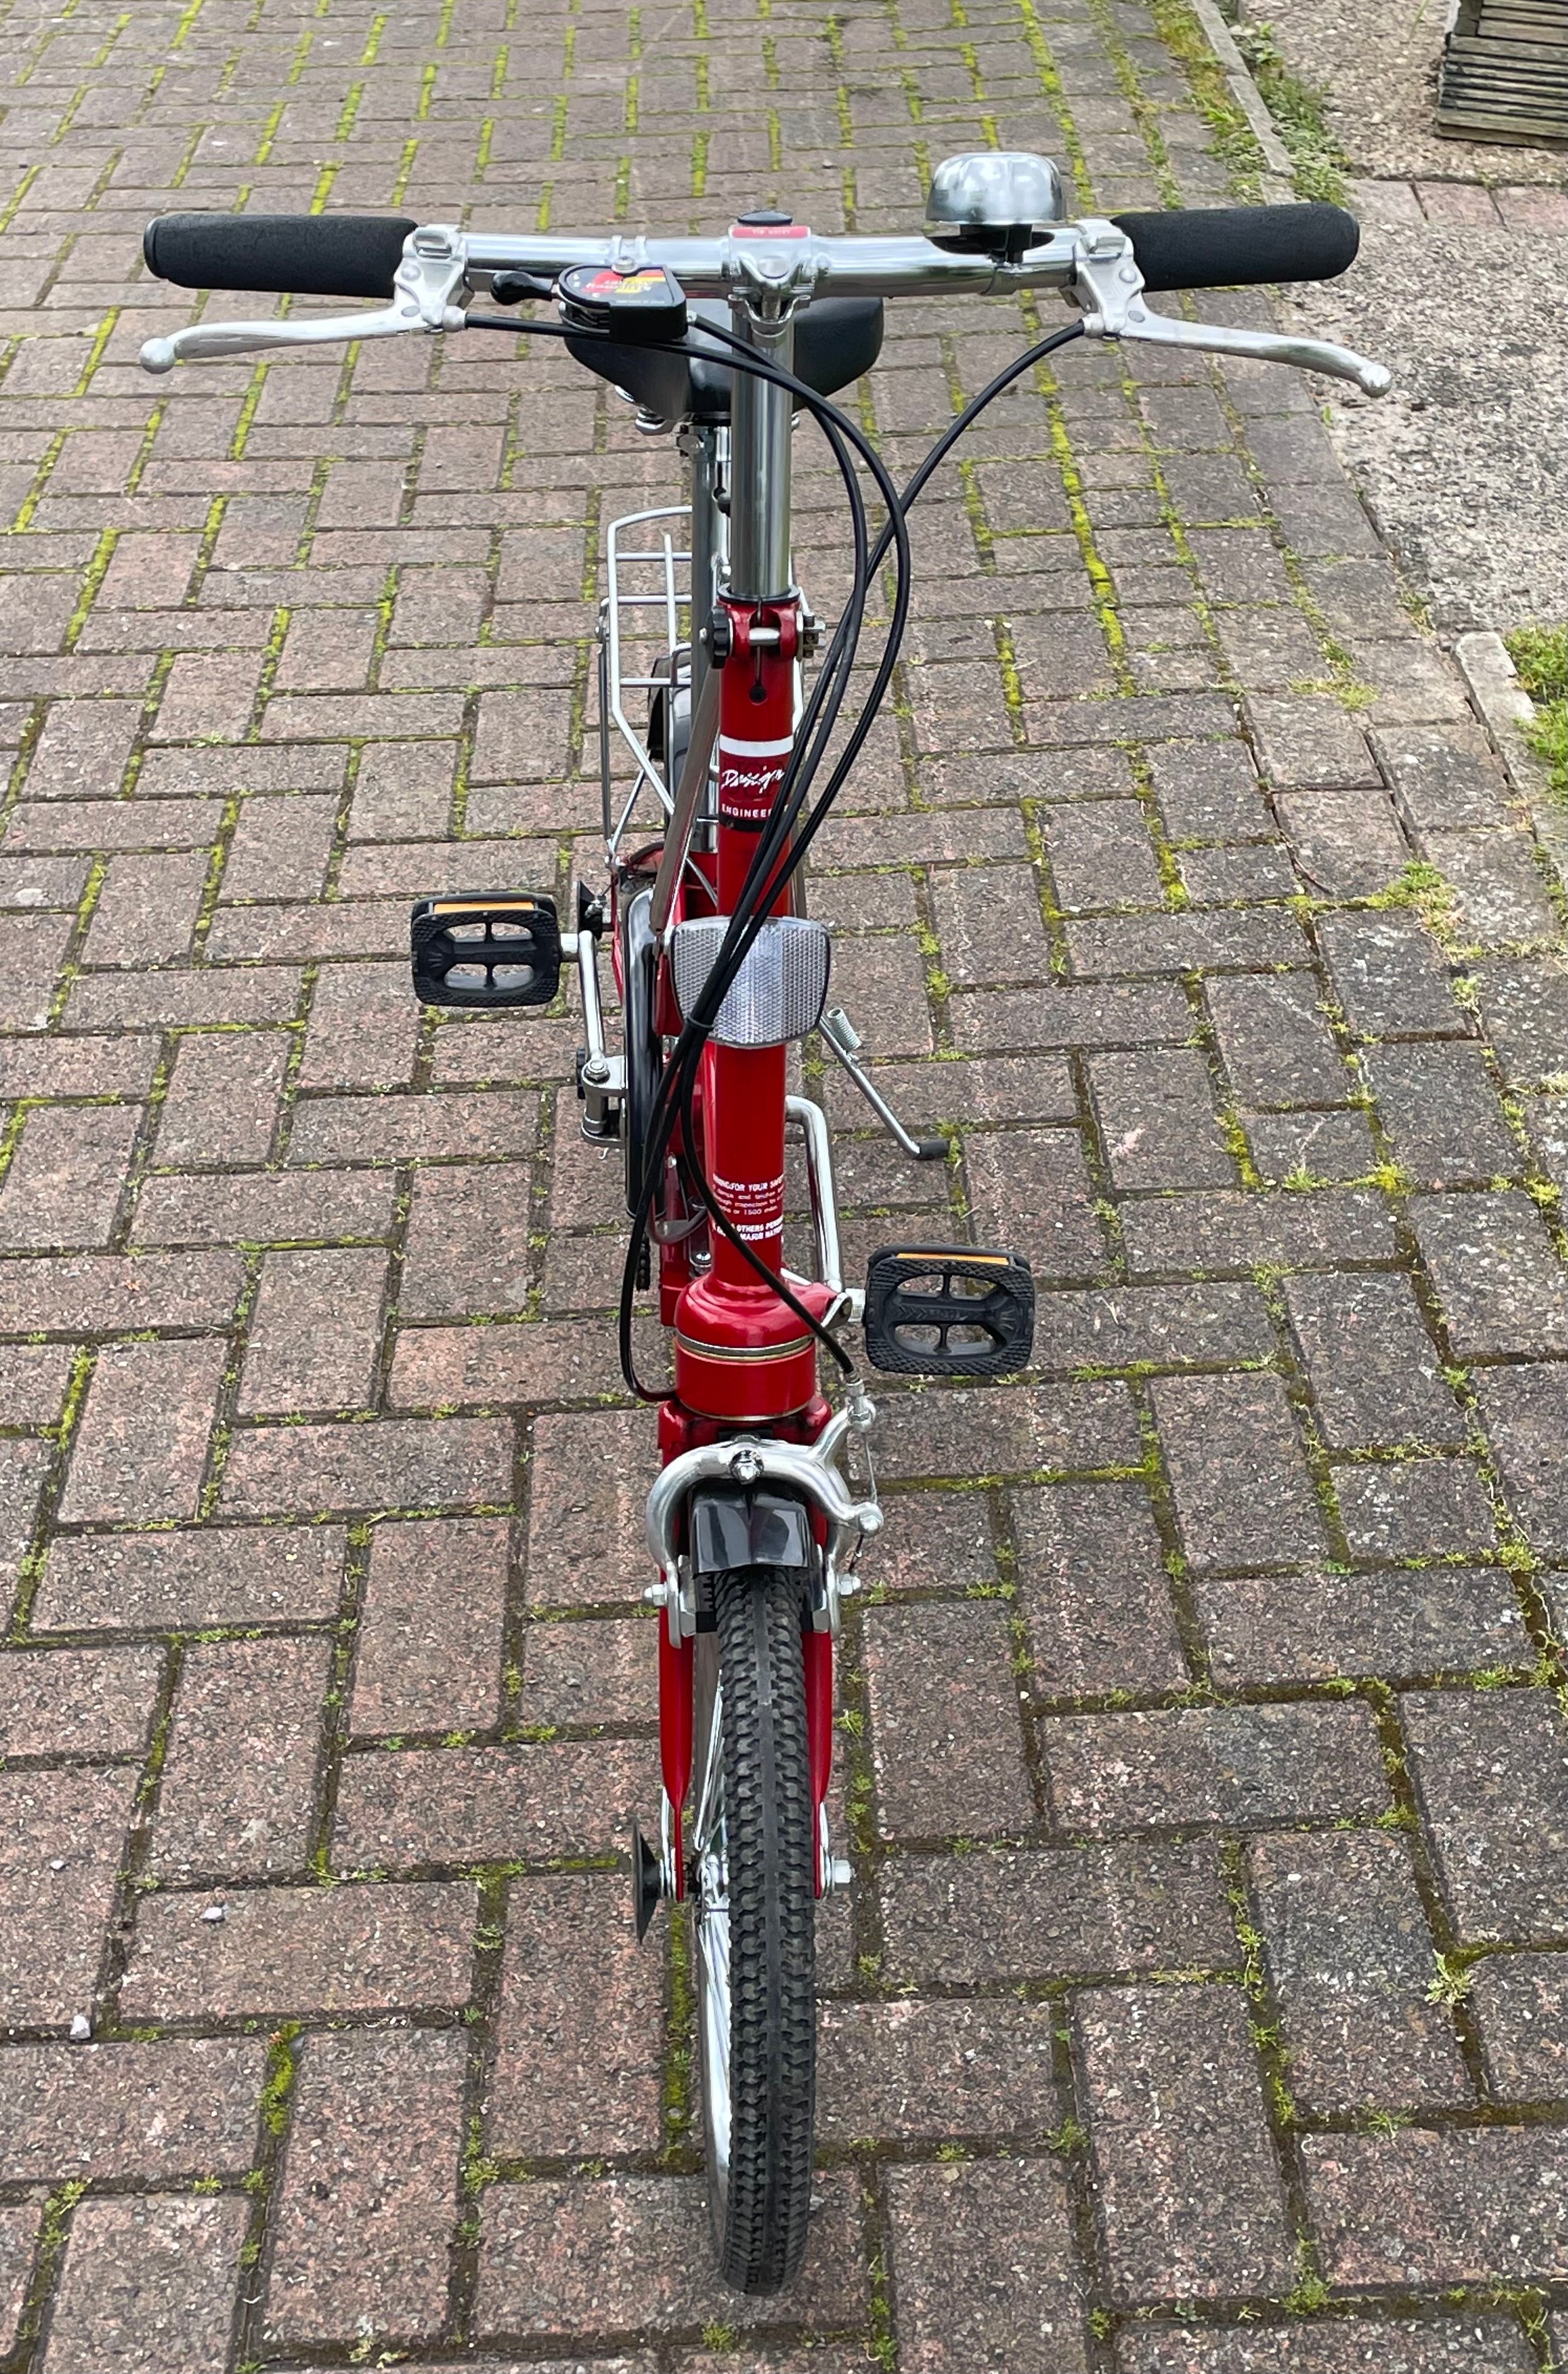 A Dahon folding bicycle, metallic red with carry case. - Image 5 of 7